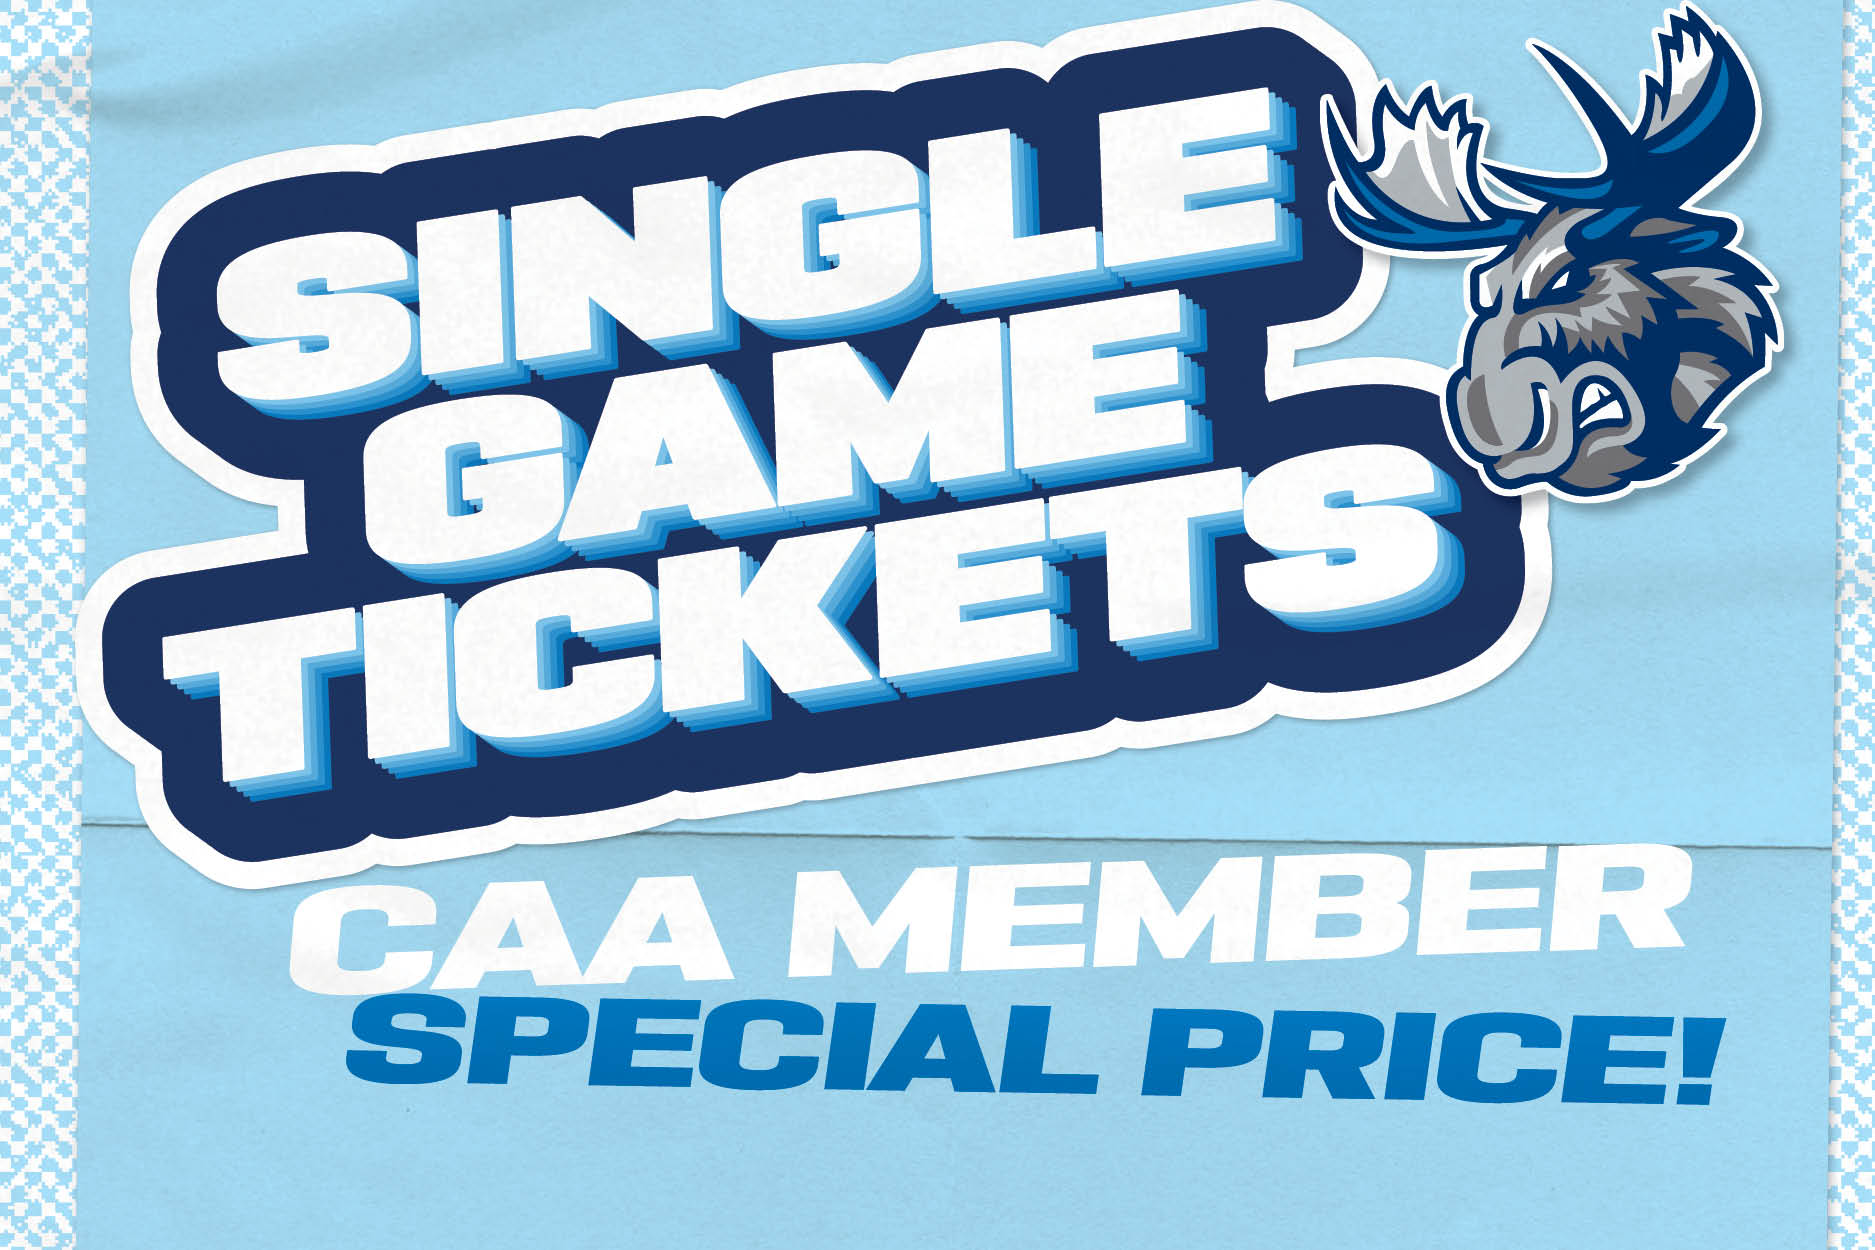 Image showing Manitoba Moose logo with the words Single Game Tickets, CAA Member Special Price!